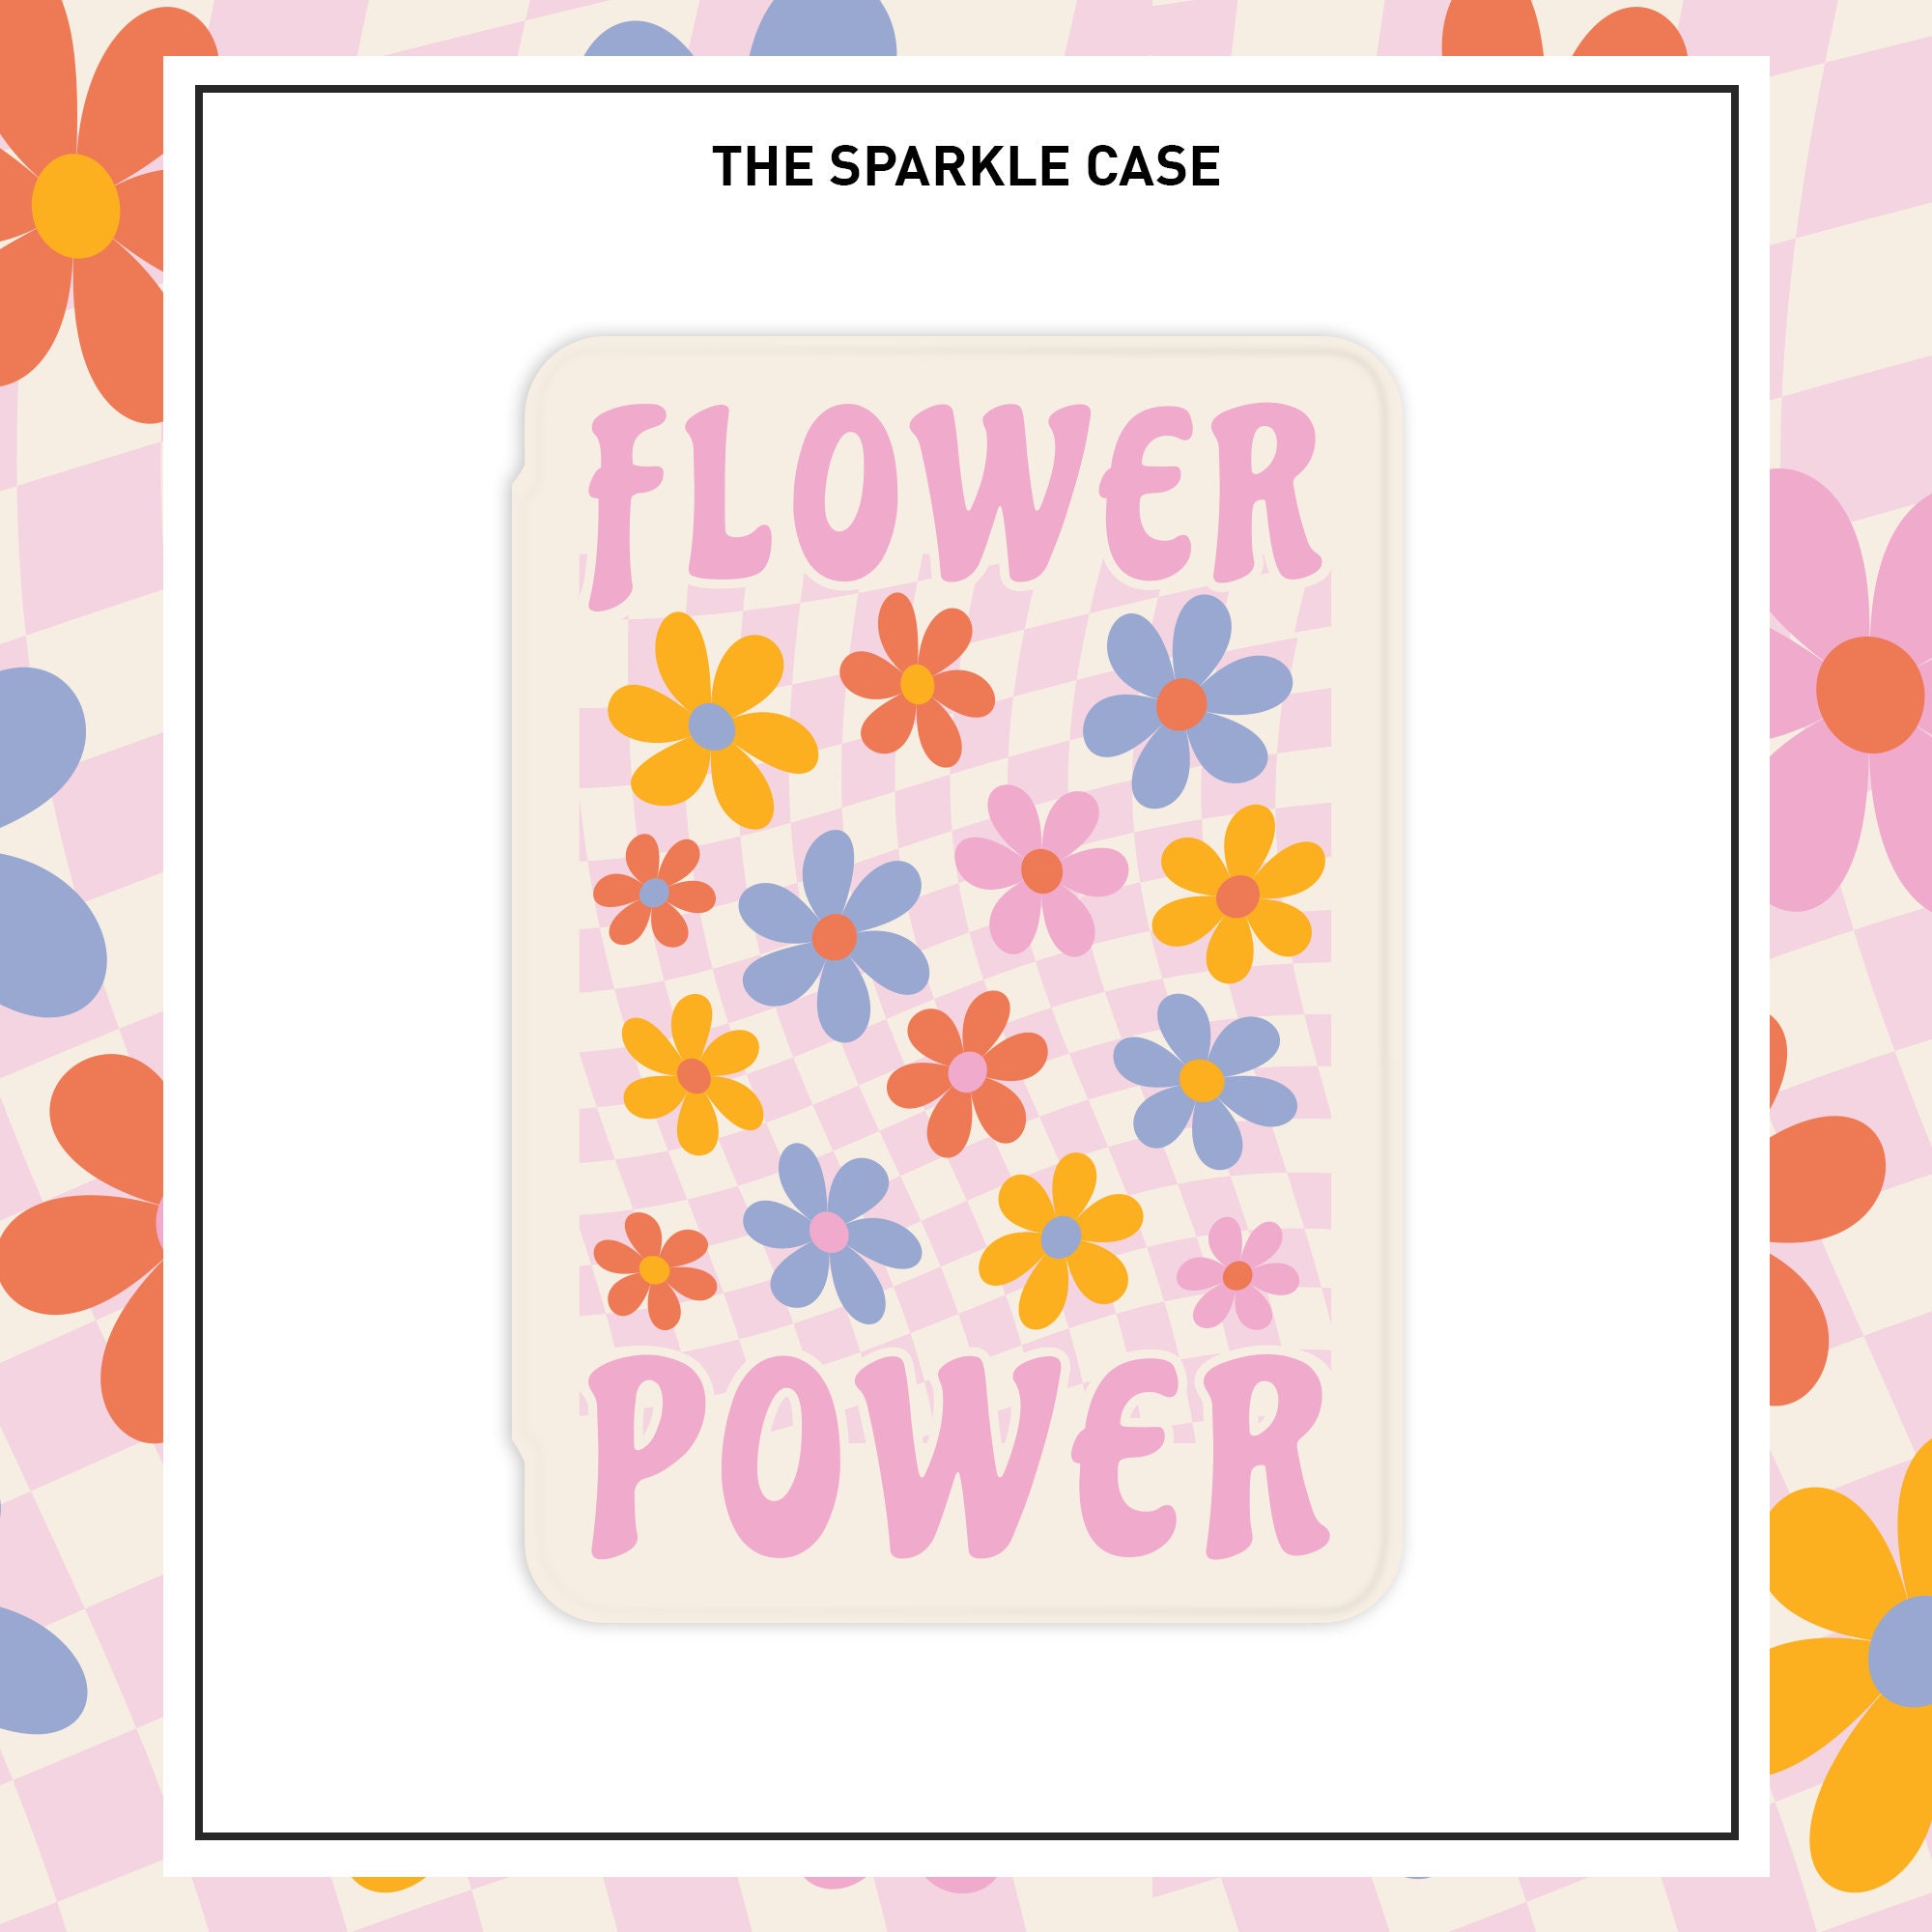 Custom Aesthetic Floral kindle case Paperwhite case, Custom Name Kindle  Case Kindle Paperwhite Case, Free Personalization - The Sparkle Case